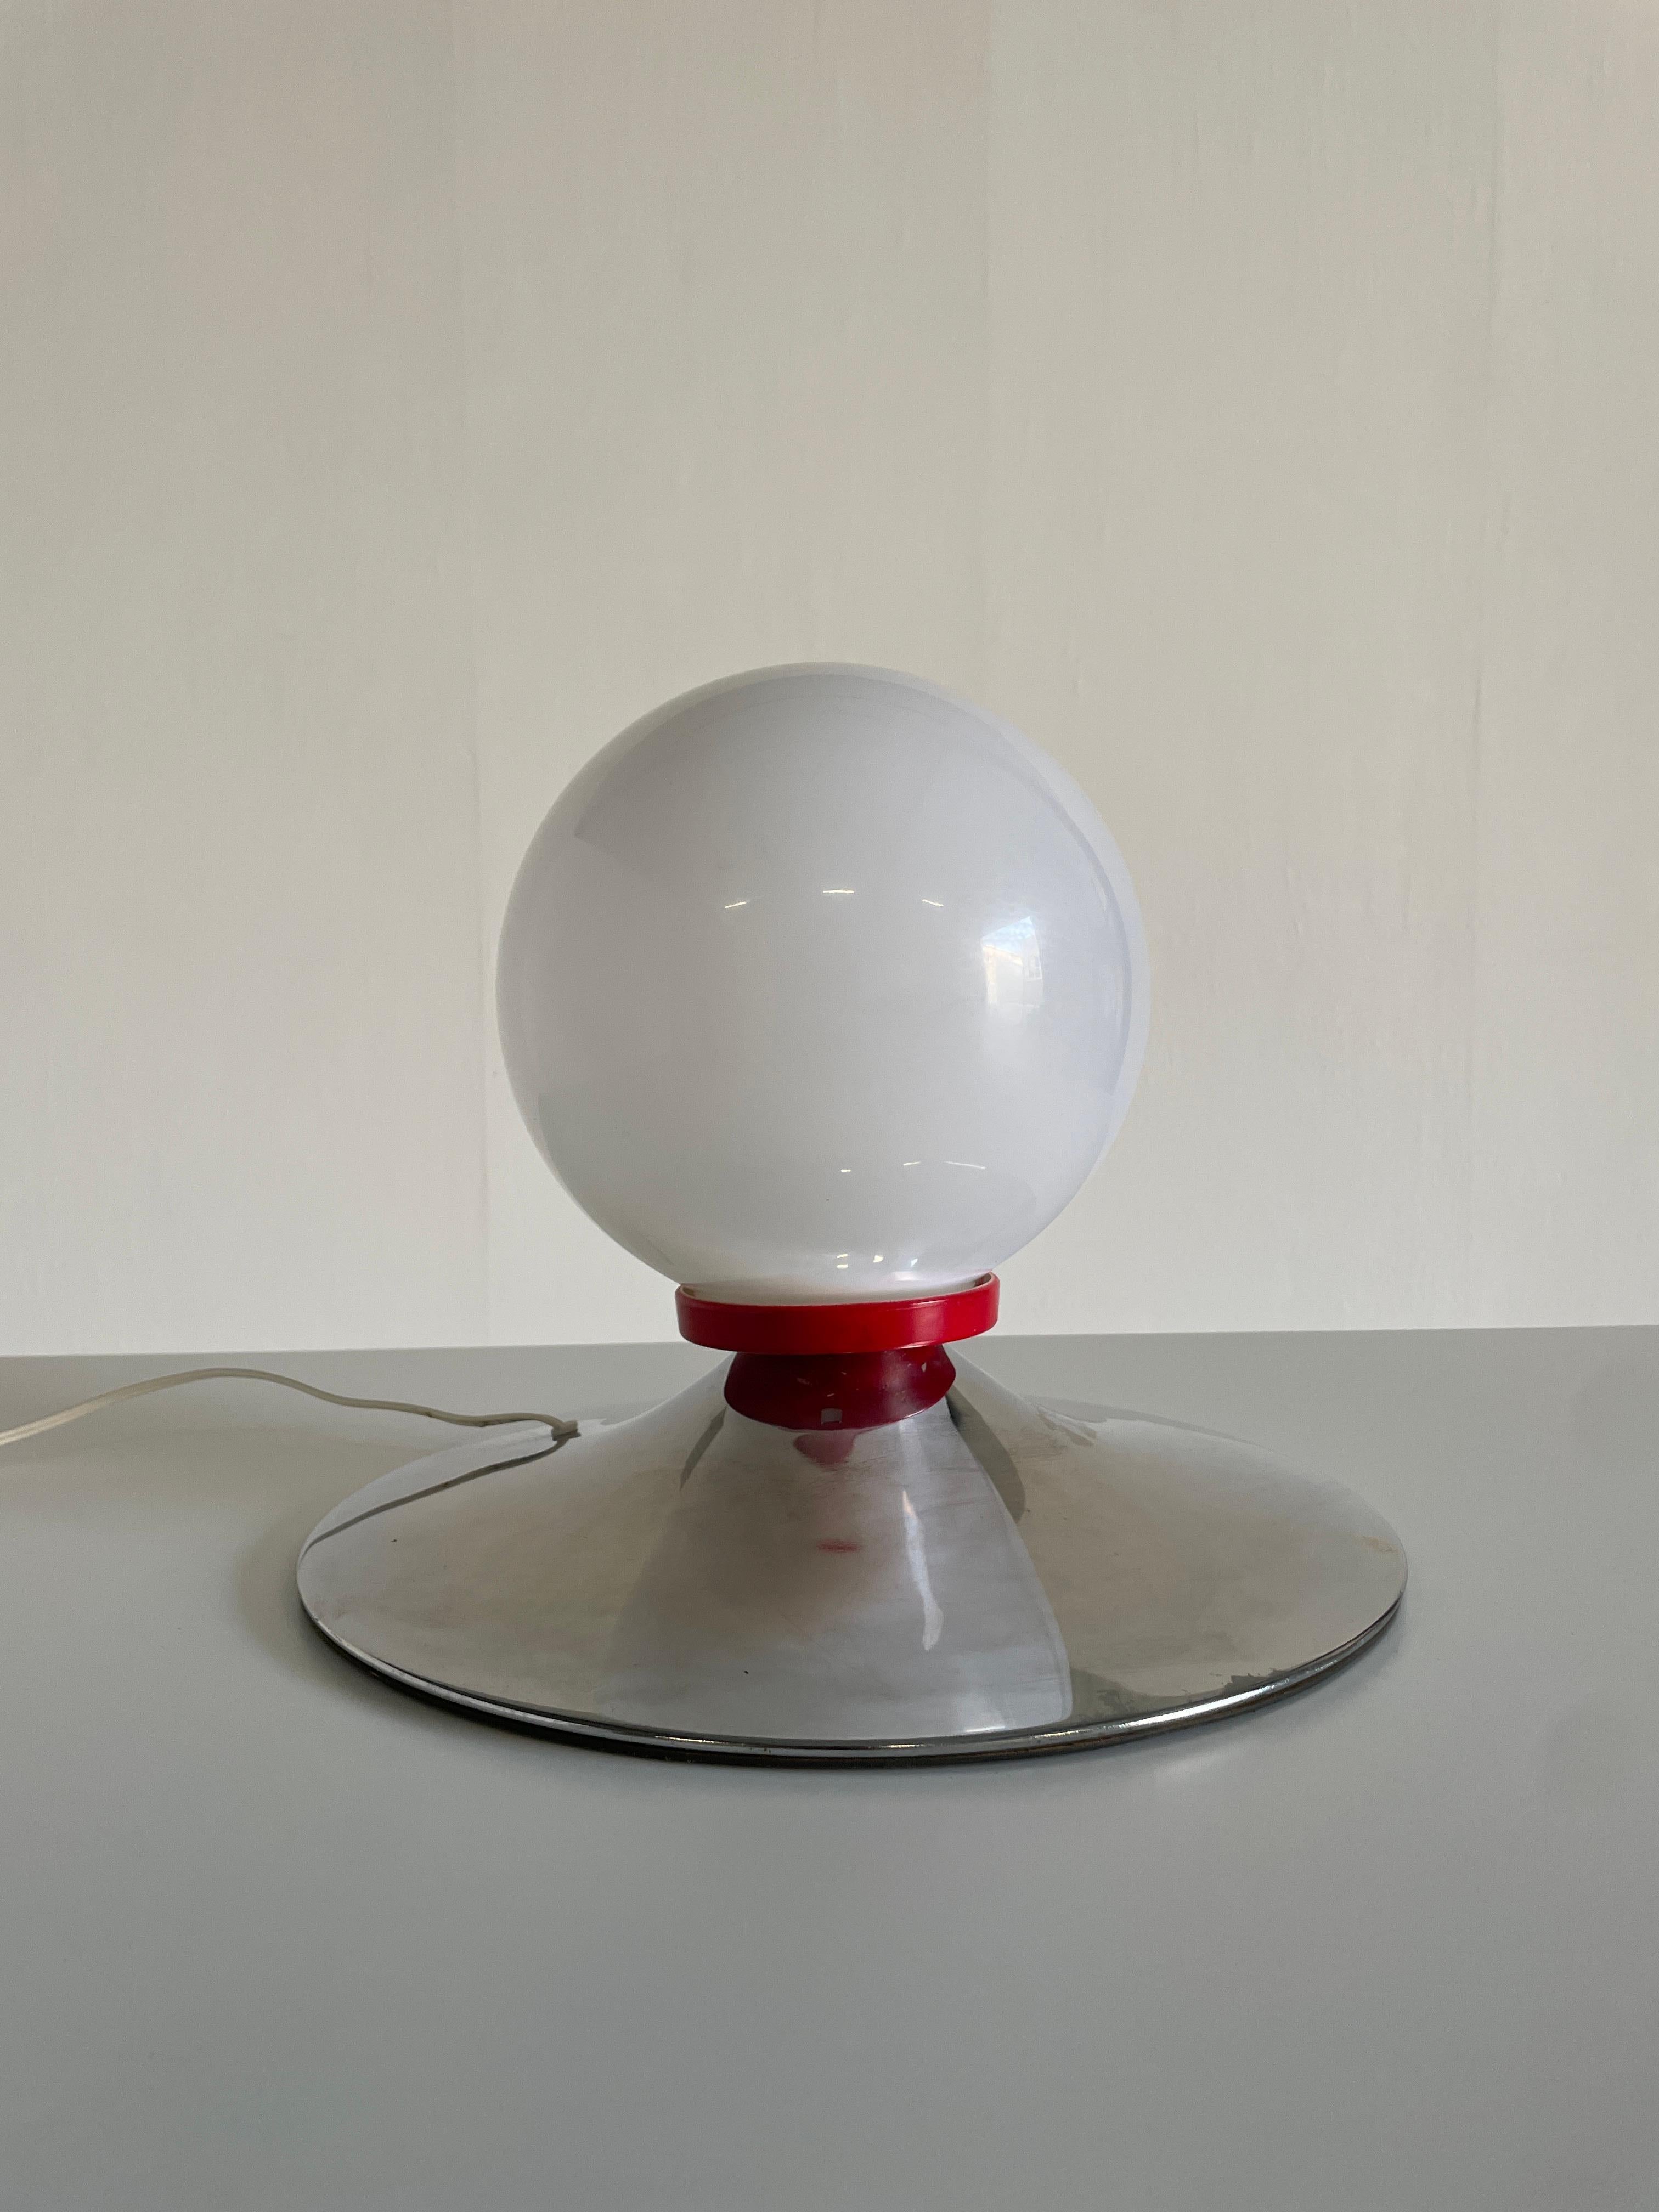 A beautiful and elegant, space age vintage white plastic table or floor lamp, made from a chrome base and white plastic sphere shade.

The lamp is in its original vintage condition. It has some smaller signs of age, but overall very well maintained.